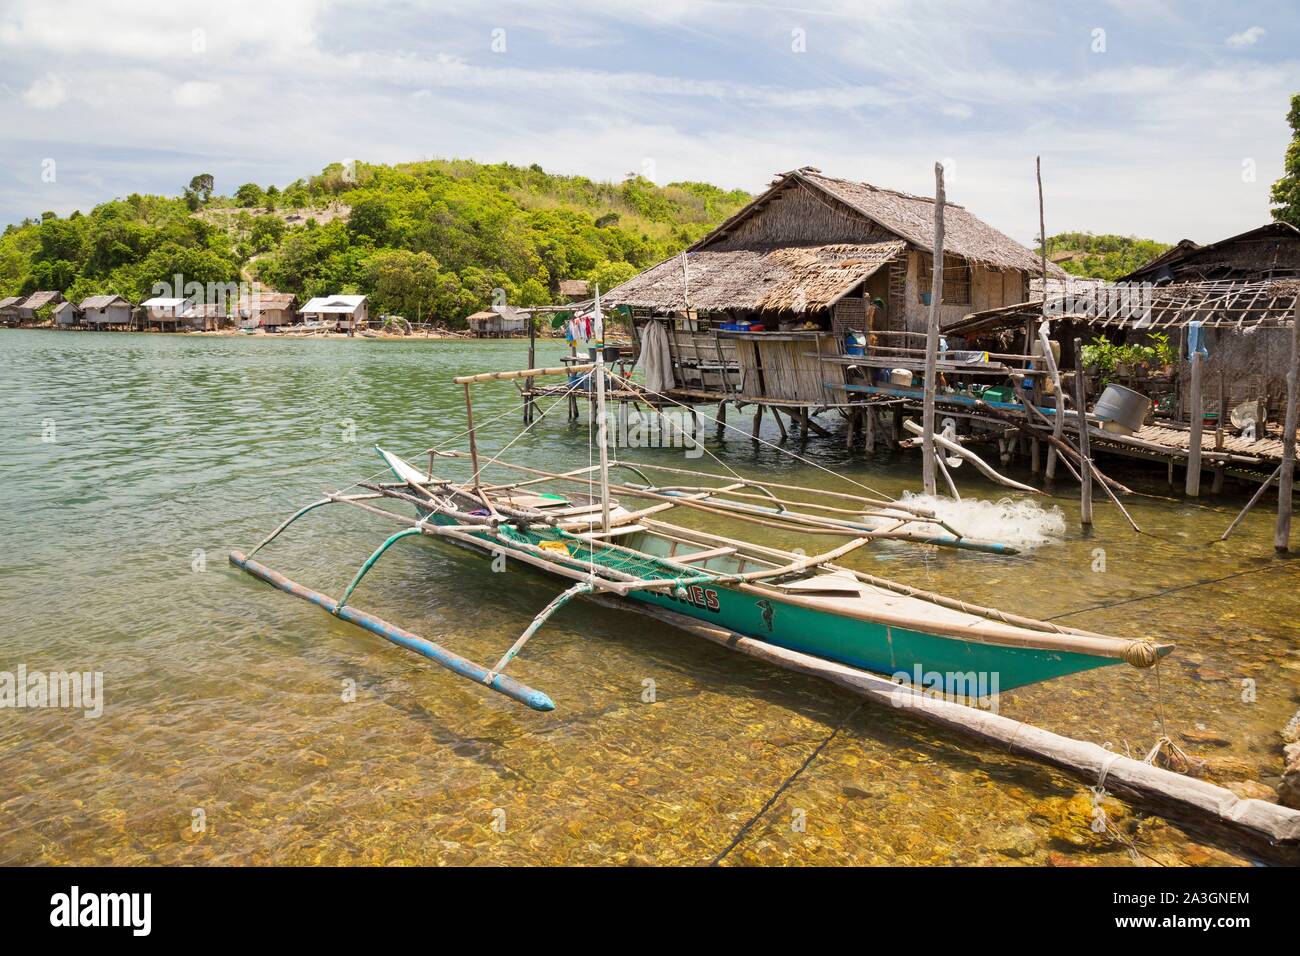 Philippines, Palawan, Malampaya Sound Protected Landscape and Seascape, fishermen village on a small island in the middle of the sound Stock Photo